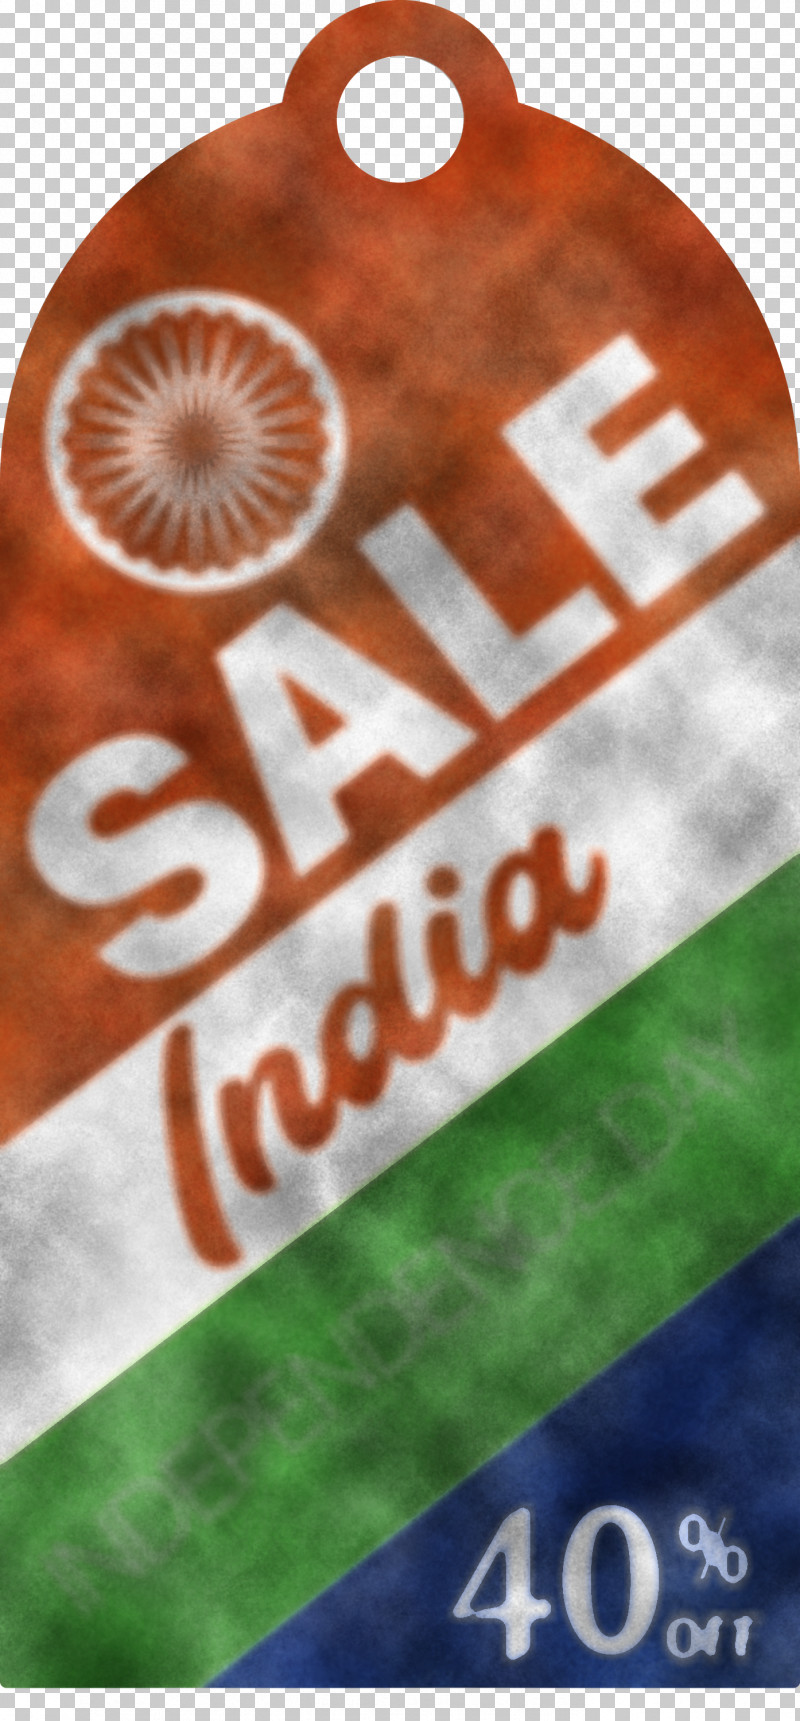 India Indenpendence Day Sale Tag India Indenpendence Day Sale Label PNG, Clipart, India Indenpendence Day Sale Label, India Indenpendence Day Sale Tag, Meter Free PNG Download